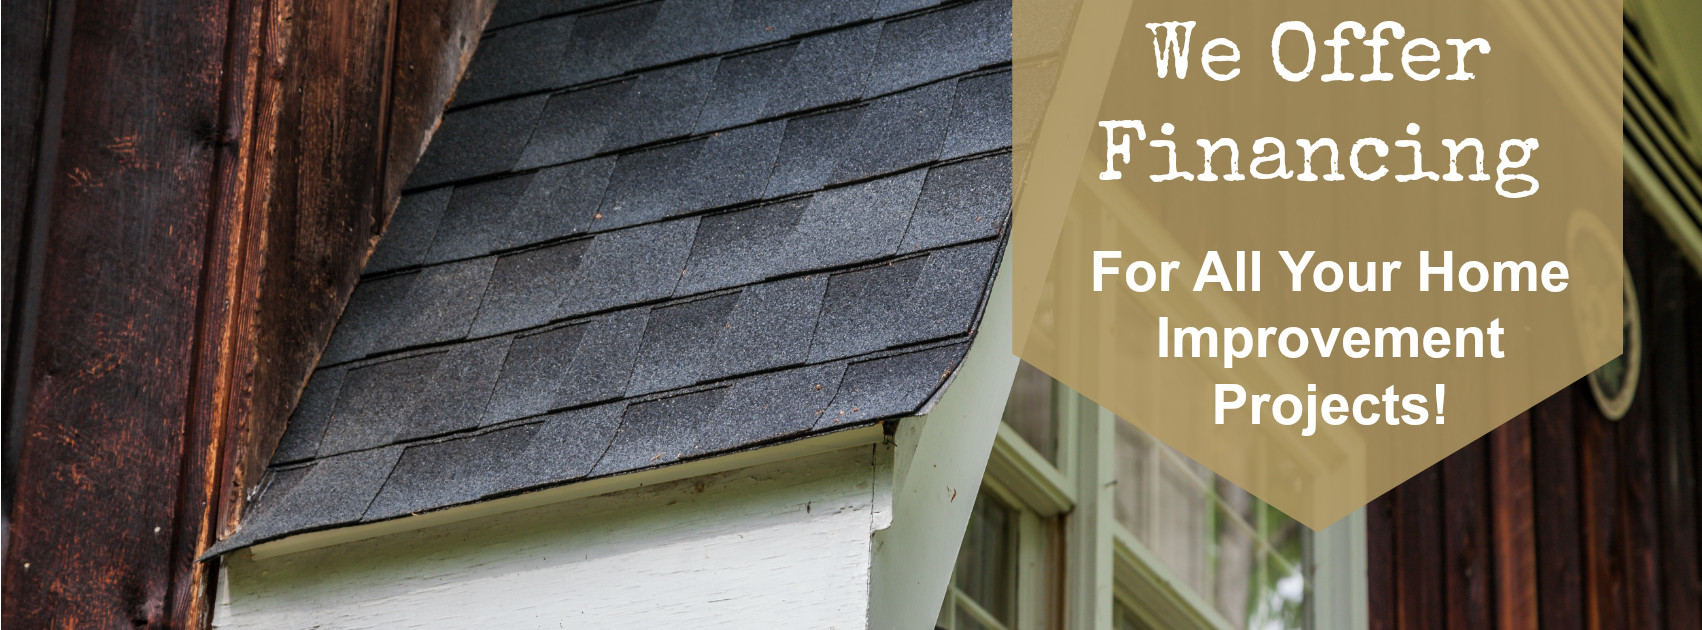 AFFORDABLE ROOF FINANCING